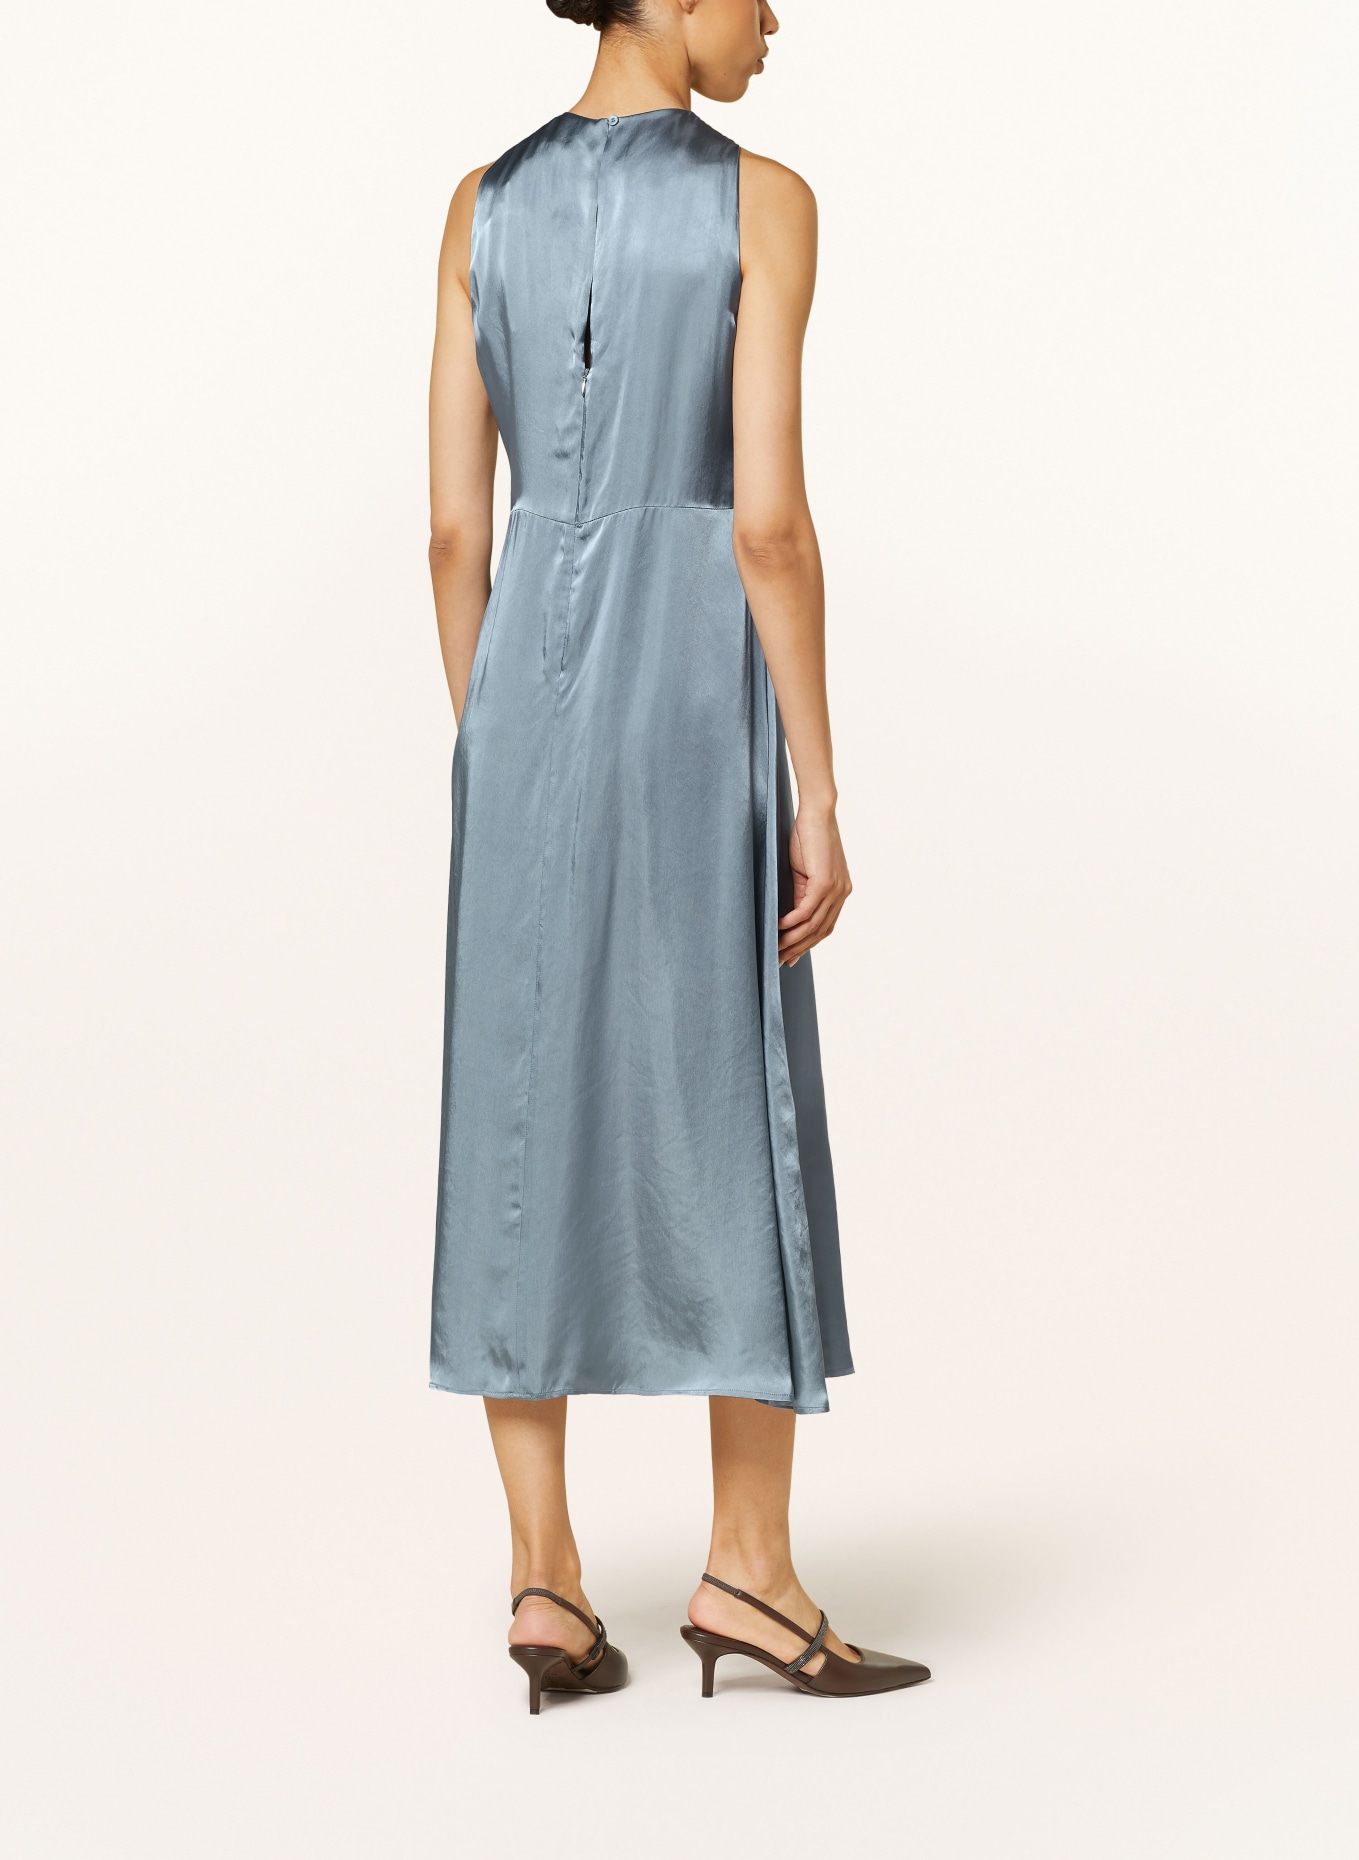 LUISA CERANO Cocktail dress made of satin, Color: BLUE GRAY (Image 3)